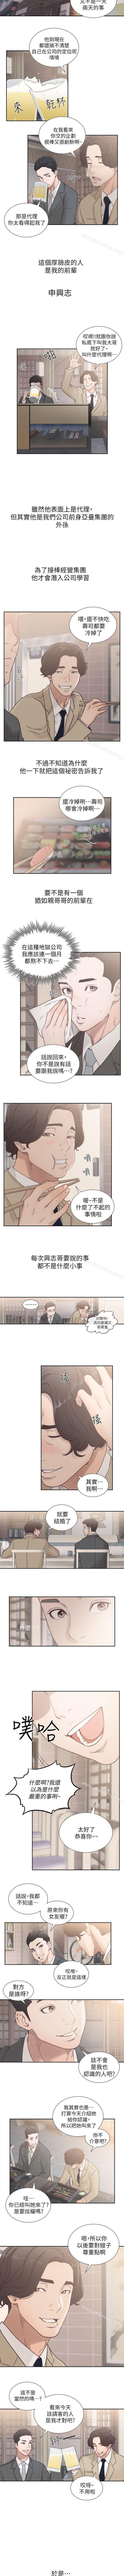 Leaked 前女友 1-51 Deutsch - Page 6